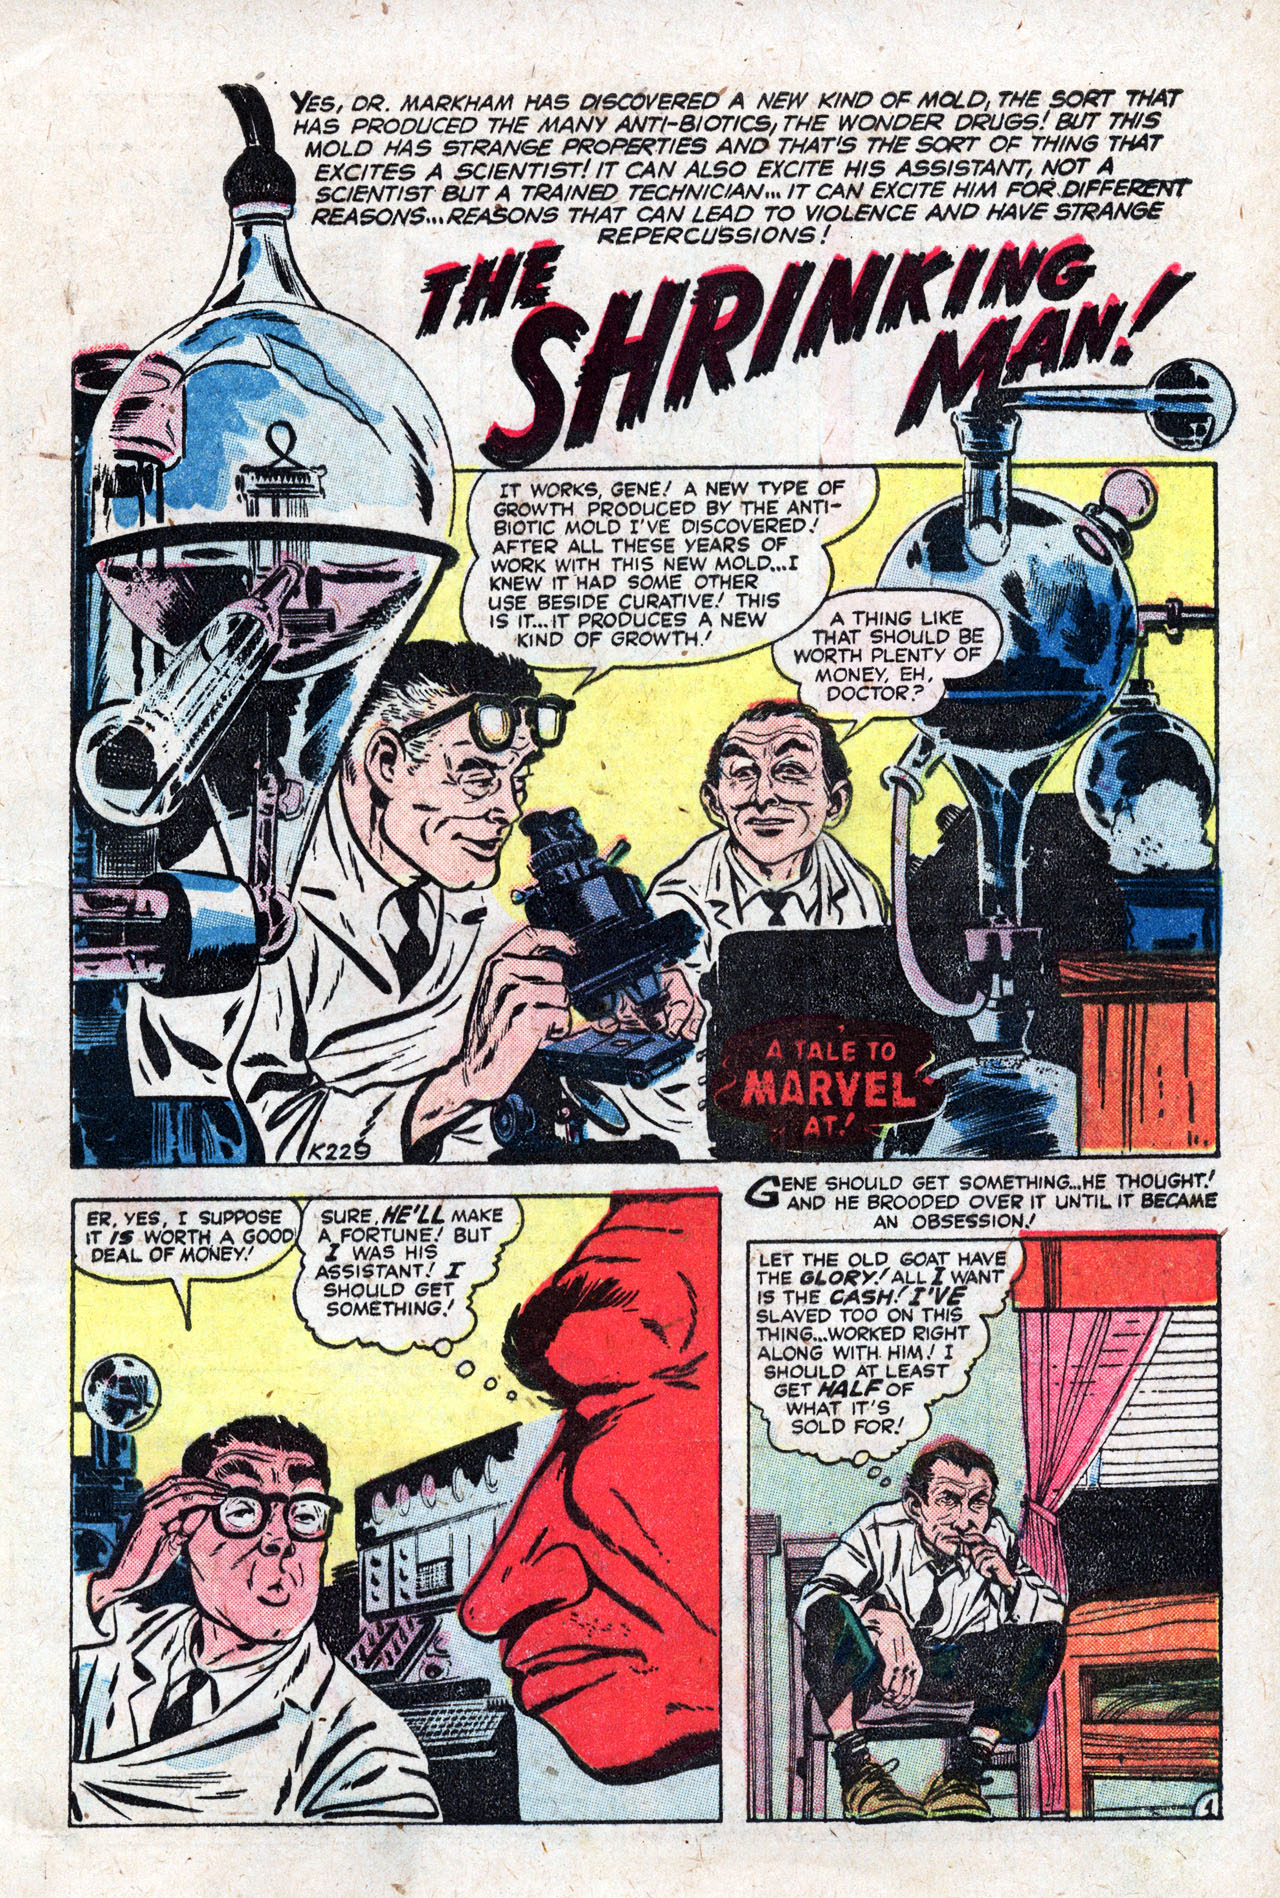 Marvel Tales (1949) 150 Page 12